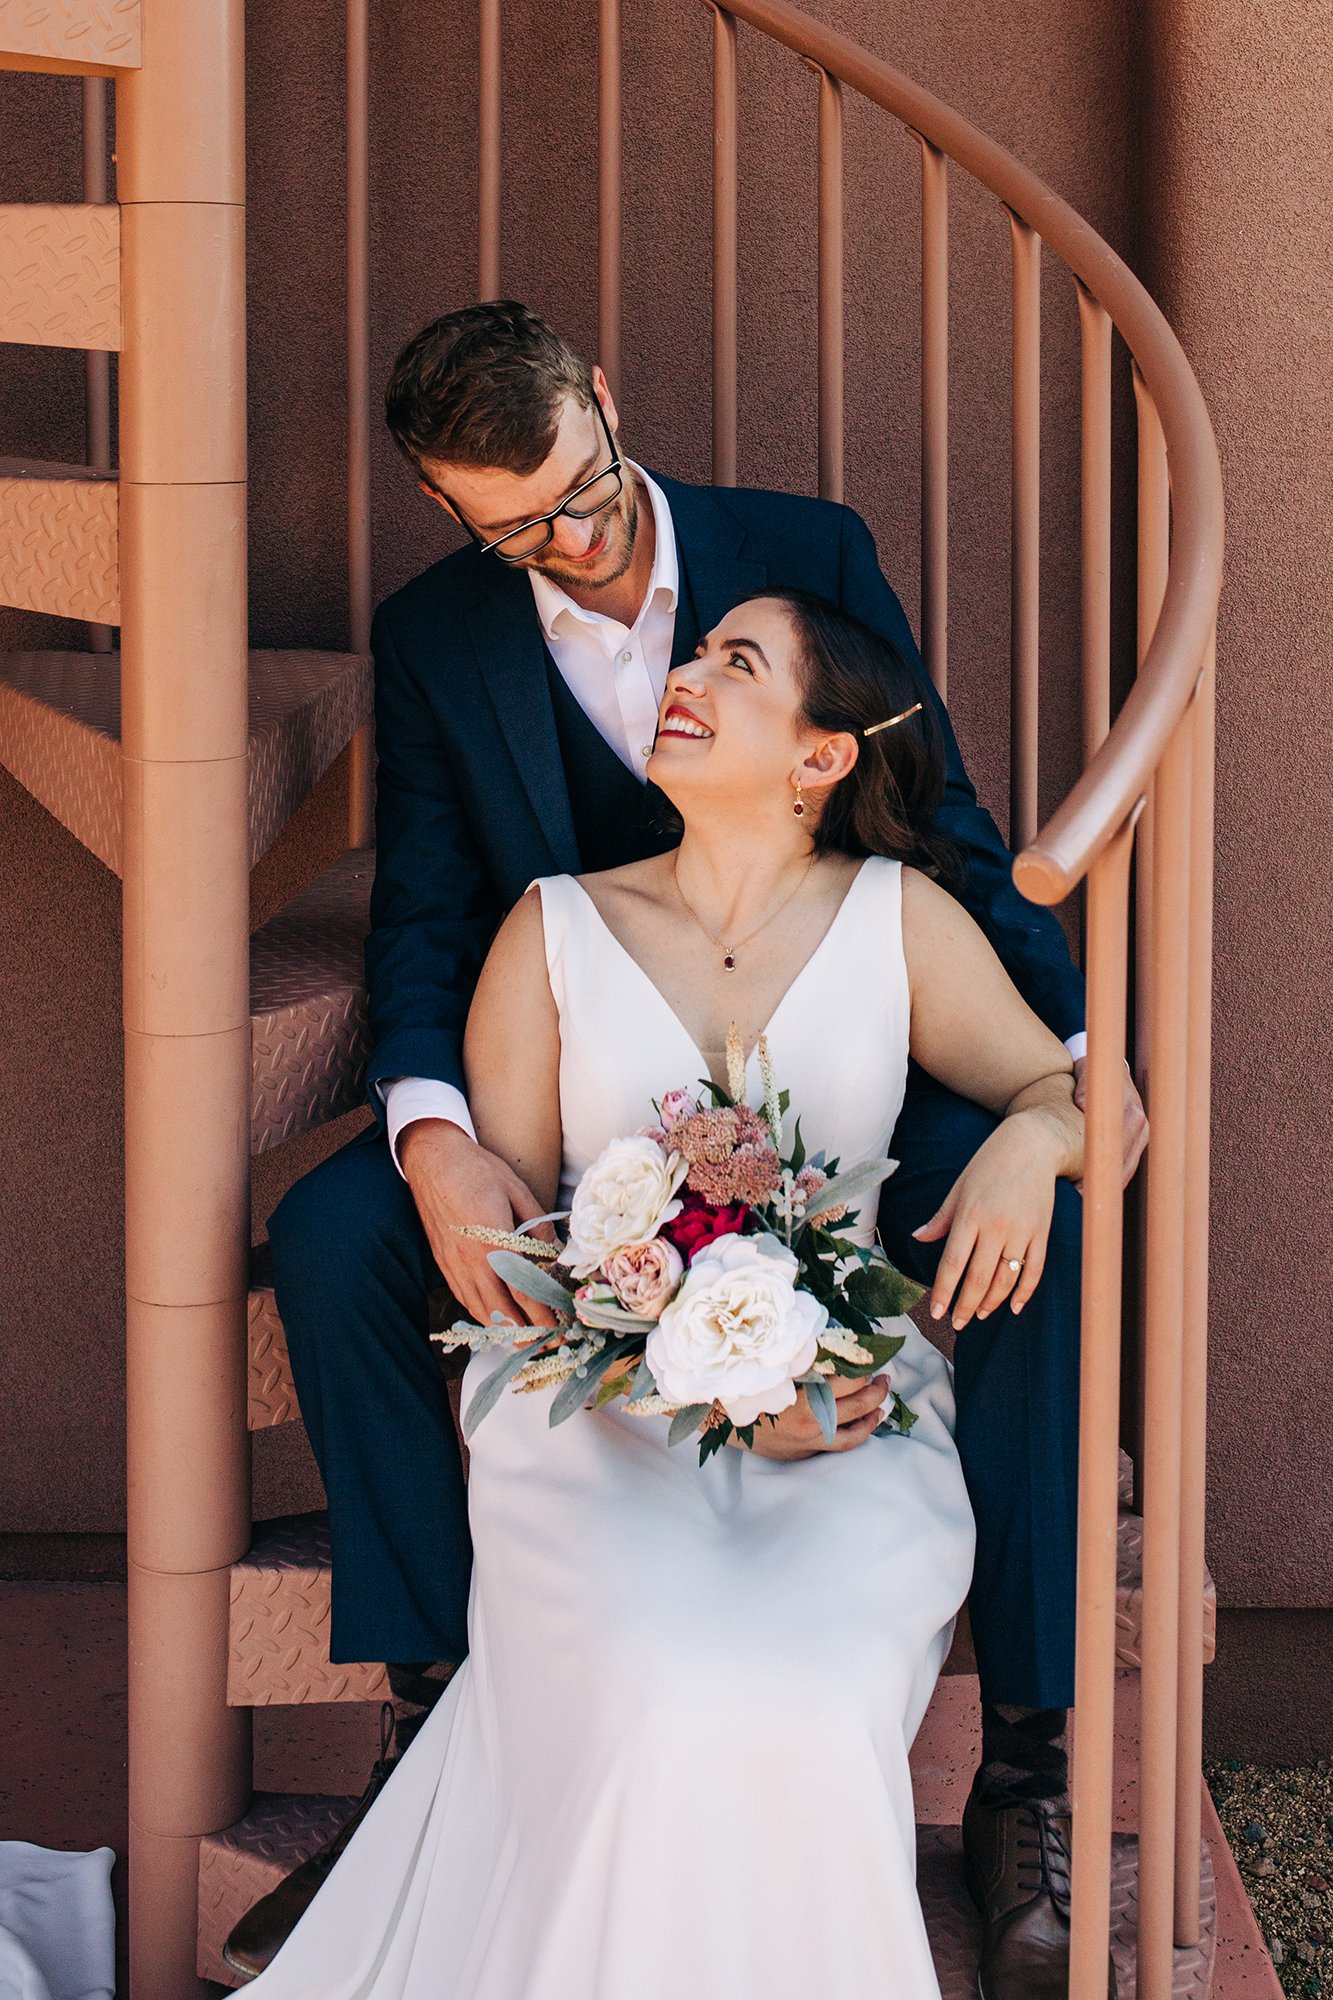 A close-up of Matt wearing a suit, snuggled up to his bride, Stephanie, during their Sedona elopement